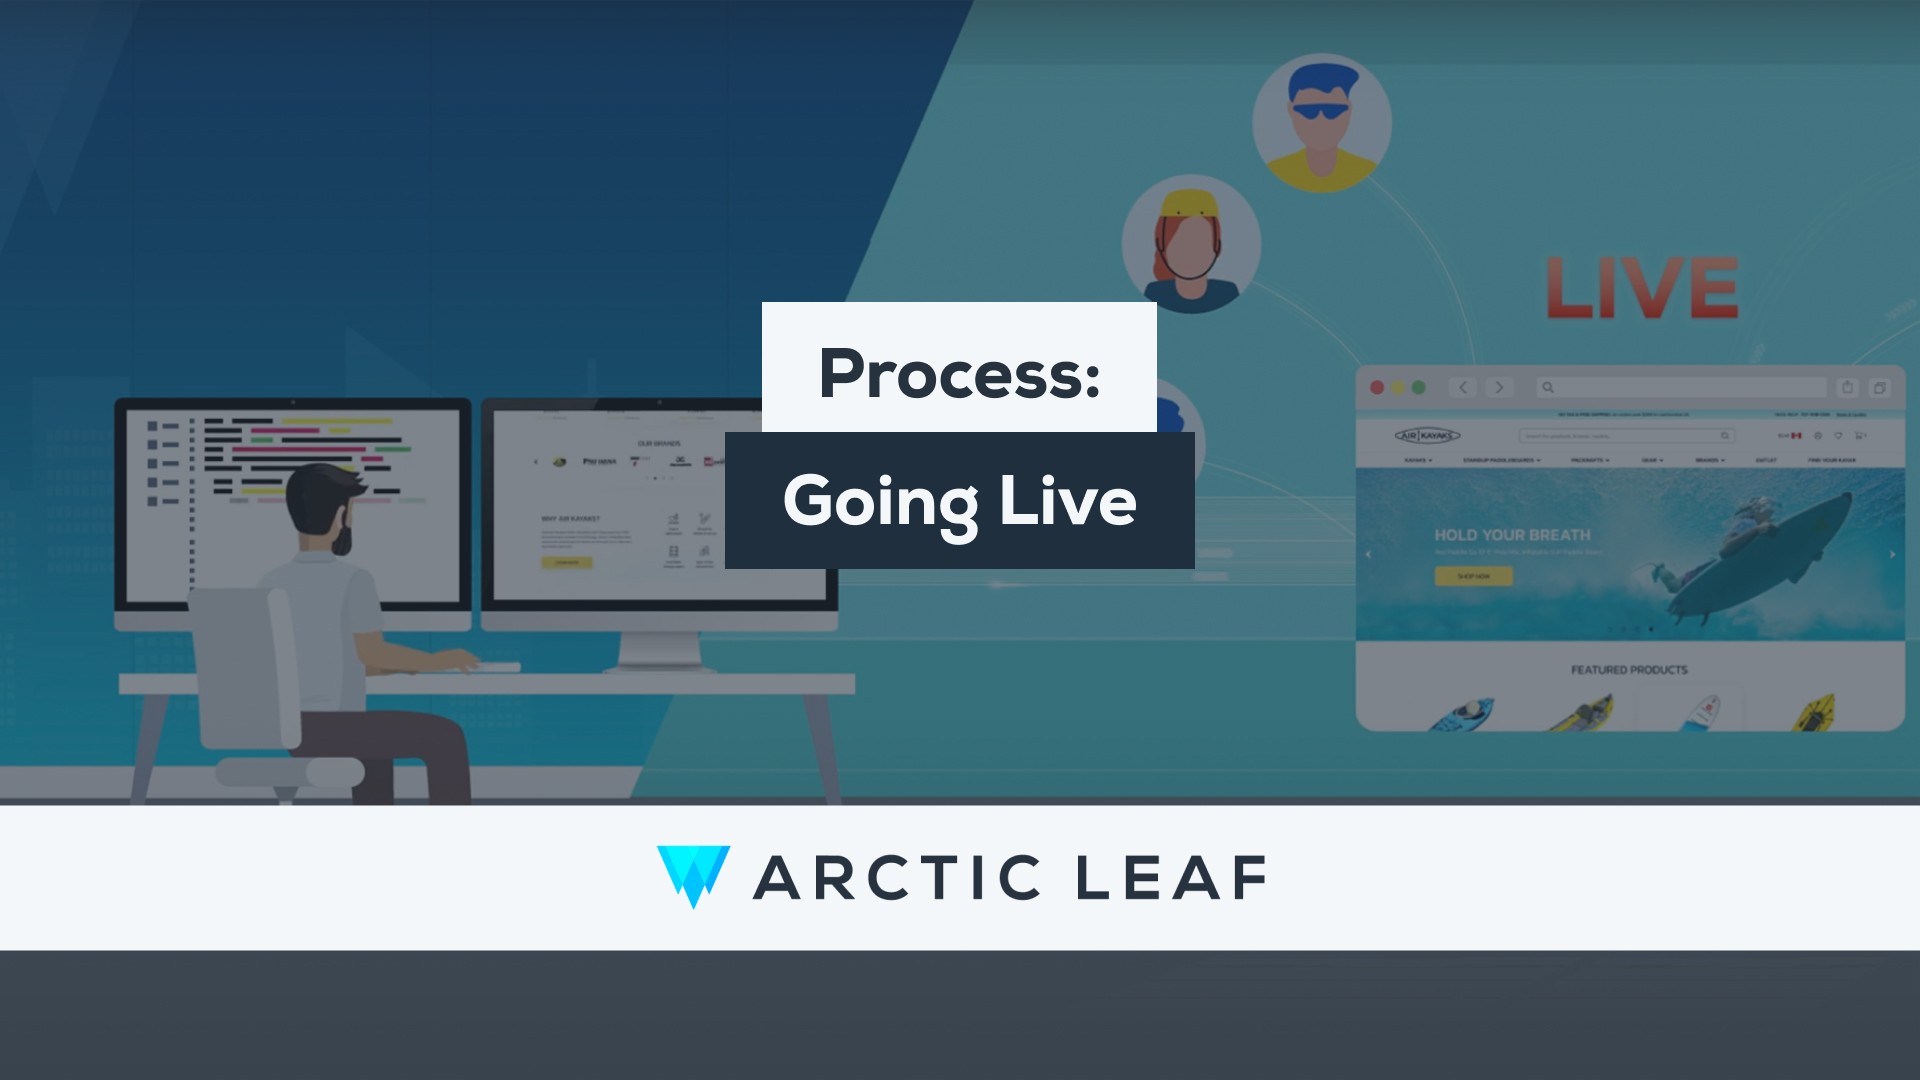 Process: Going Live